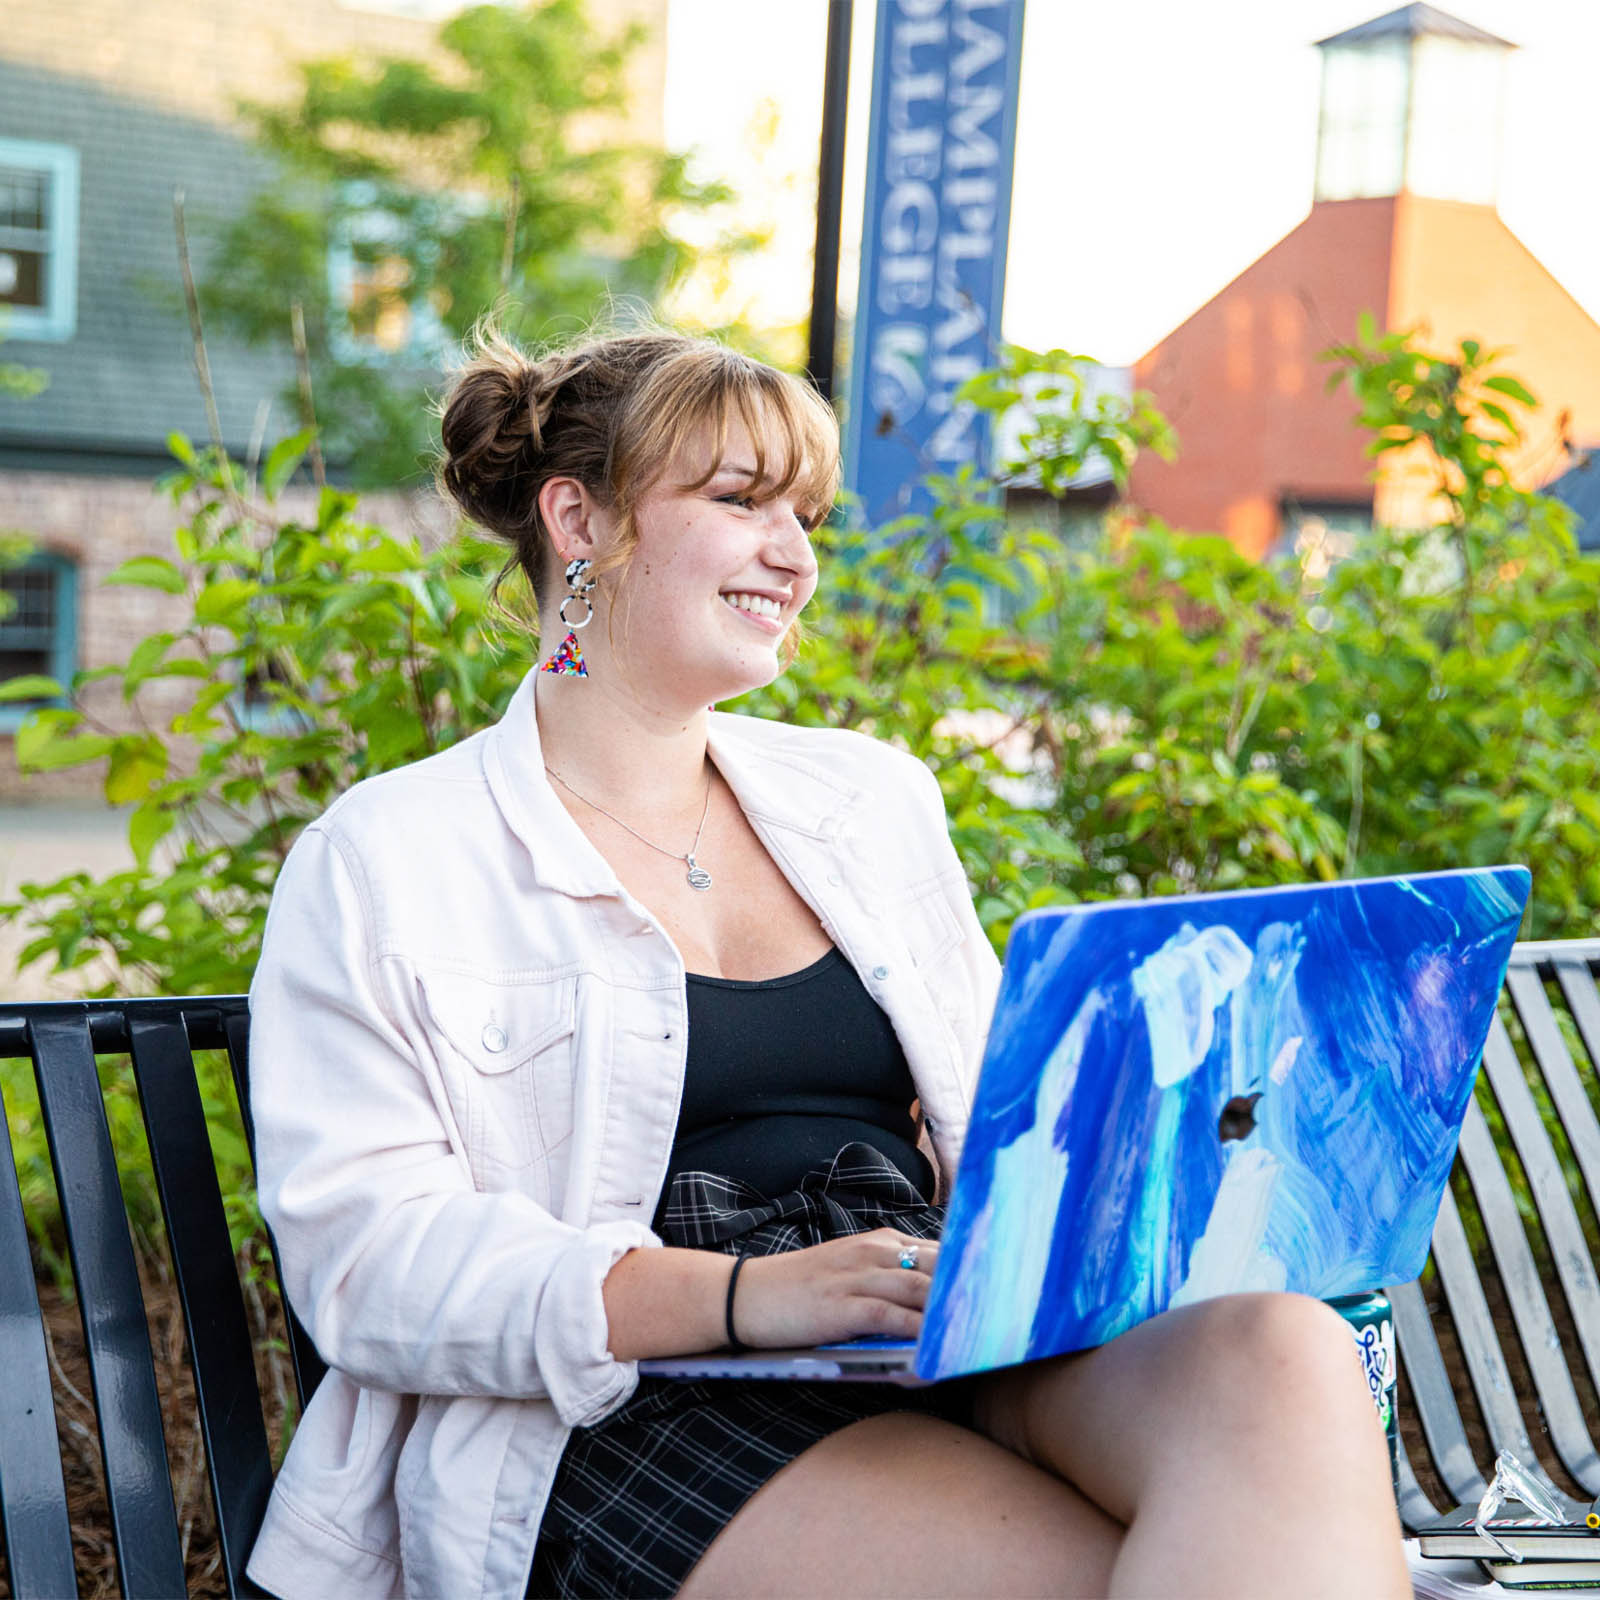 student smiles while using her laptop outdoors